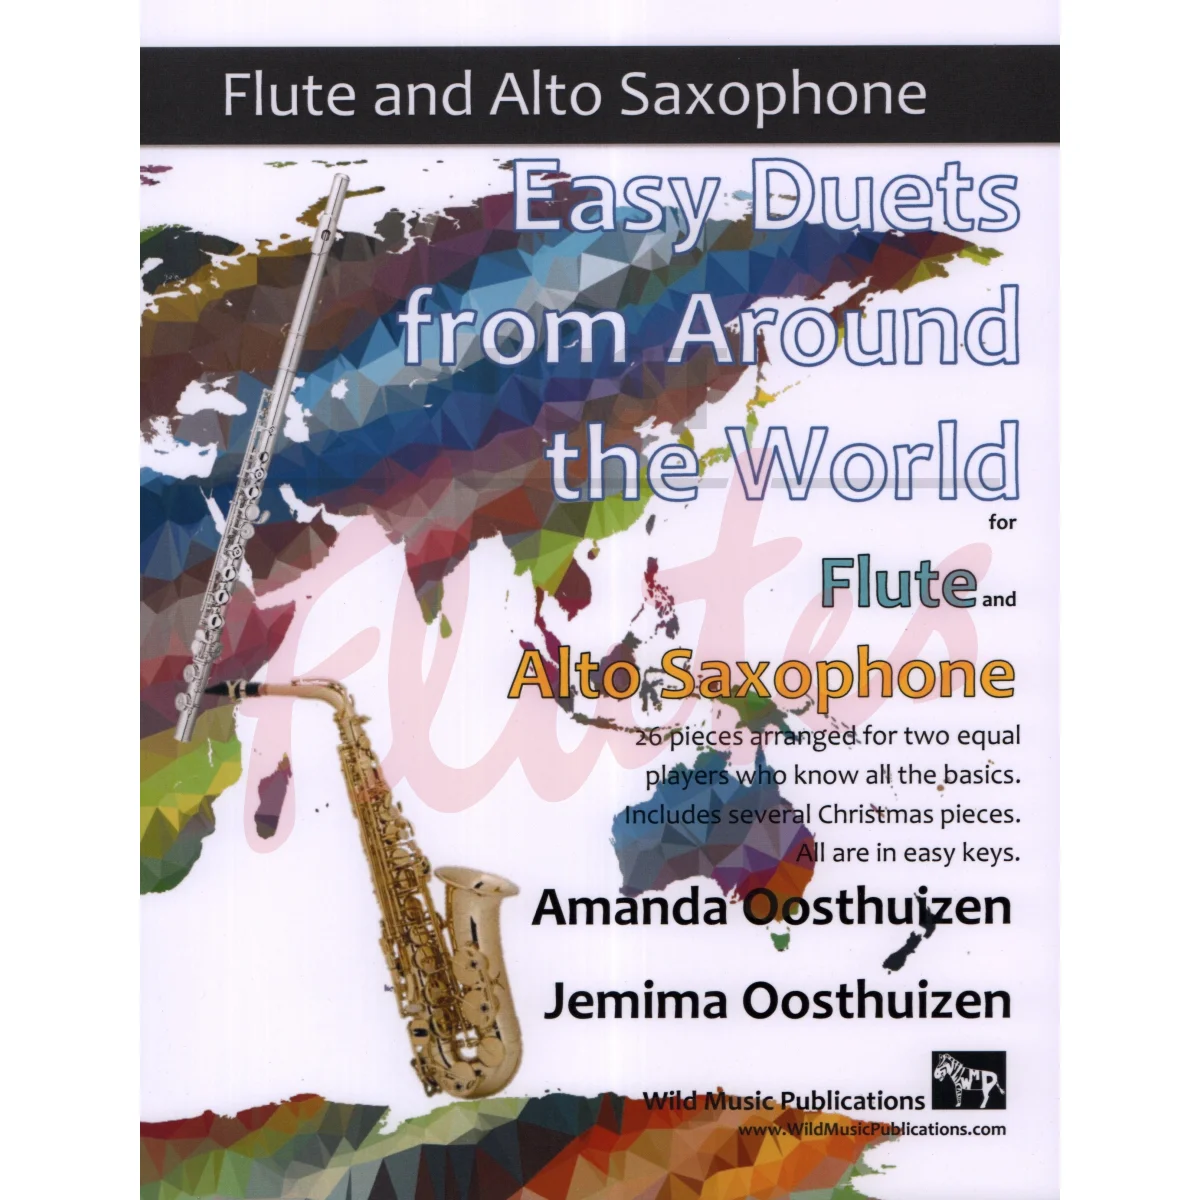 Easy Duets from Around the World for Flute and Alto Saxophone